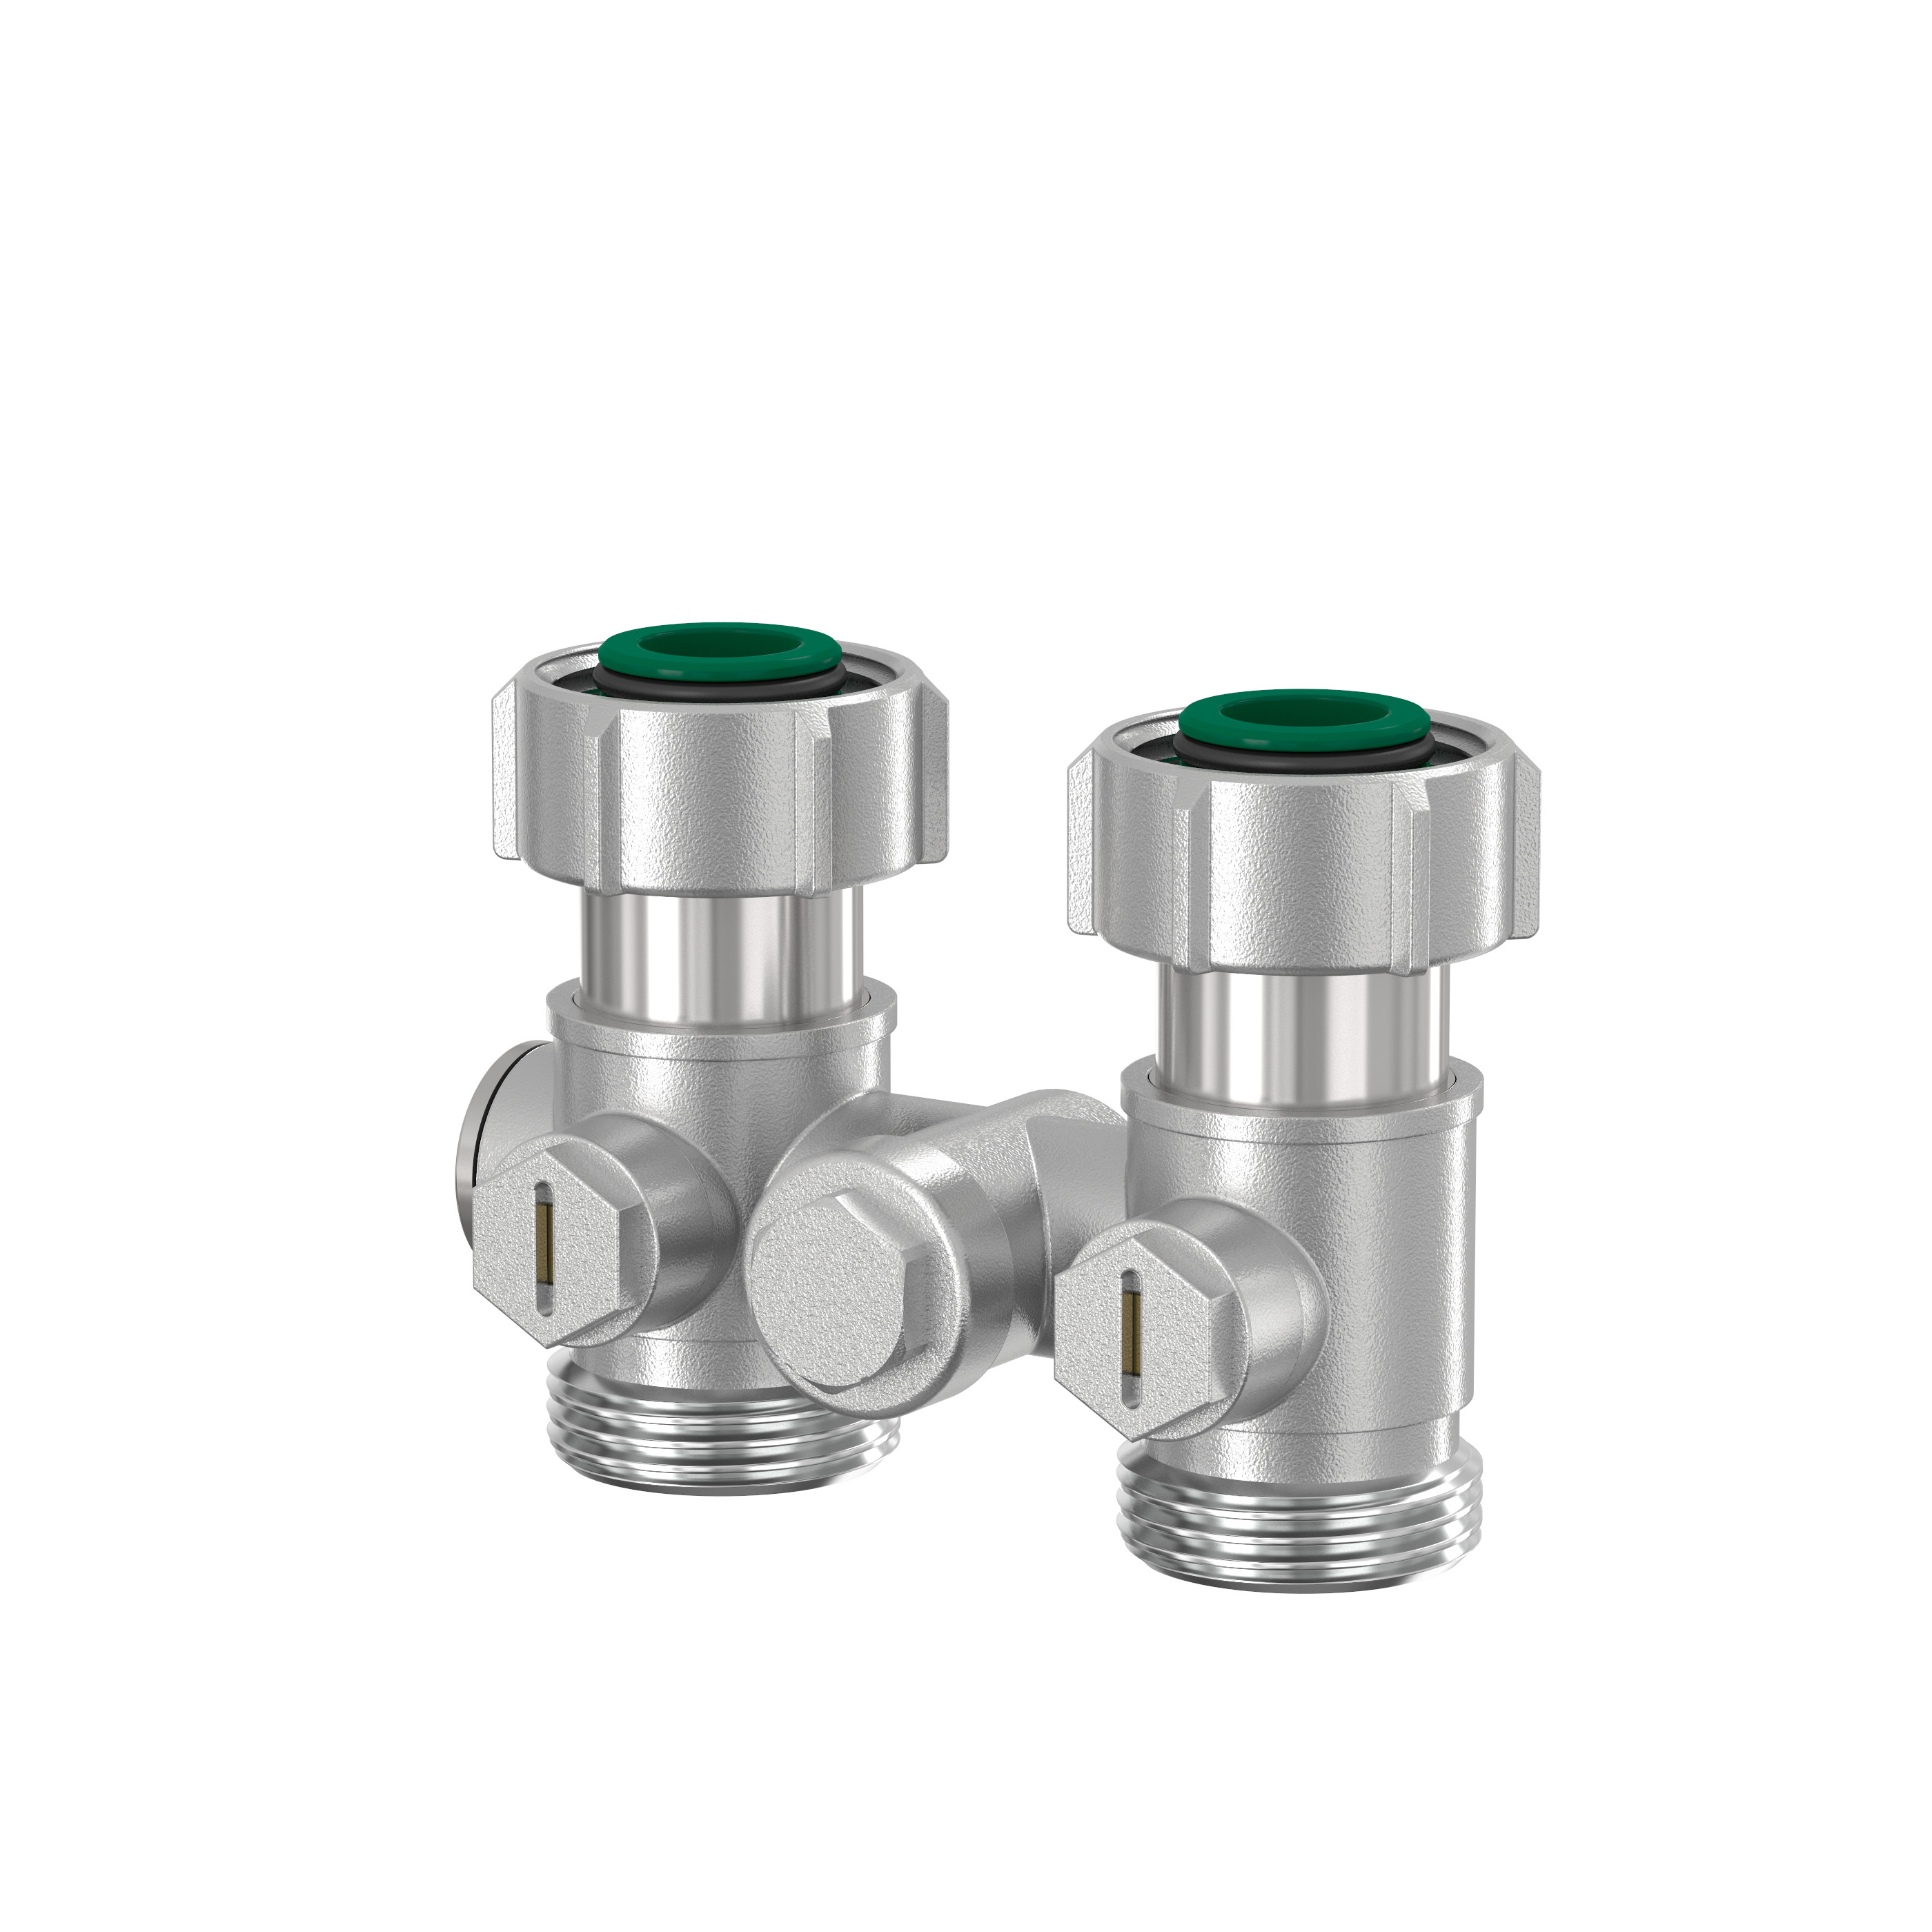 Exclusiv H-Module for One-pipe System with Cone Inserts